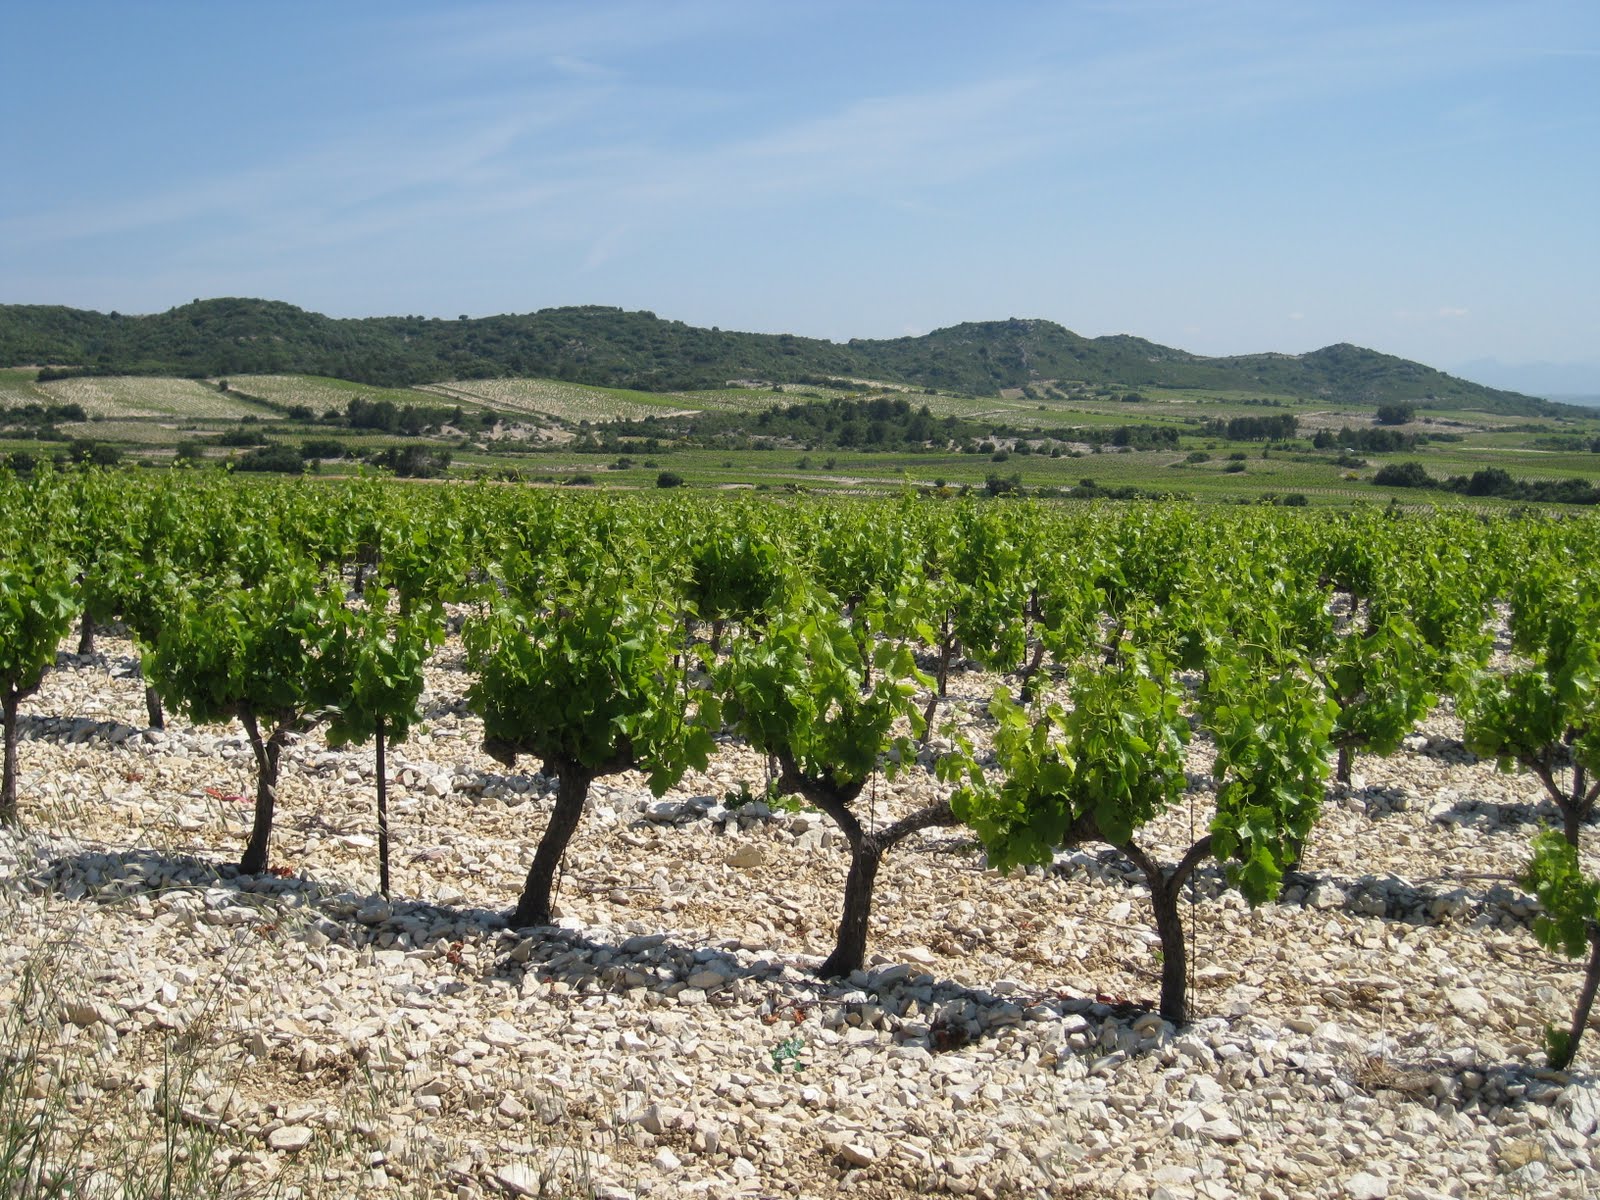 An Atlantan Eats: Provence: Light lunch in Chateau Neuf du Pape